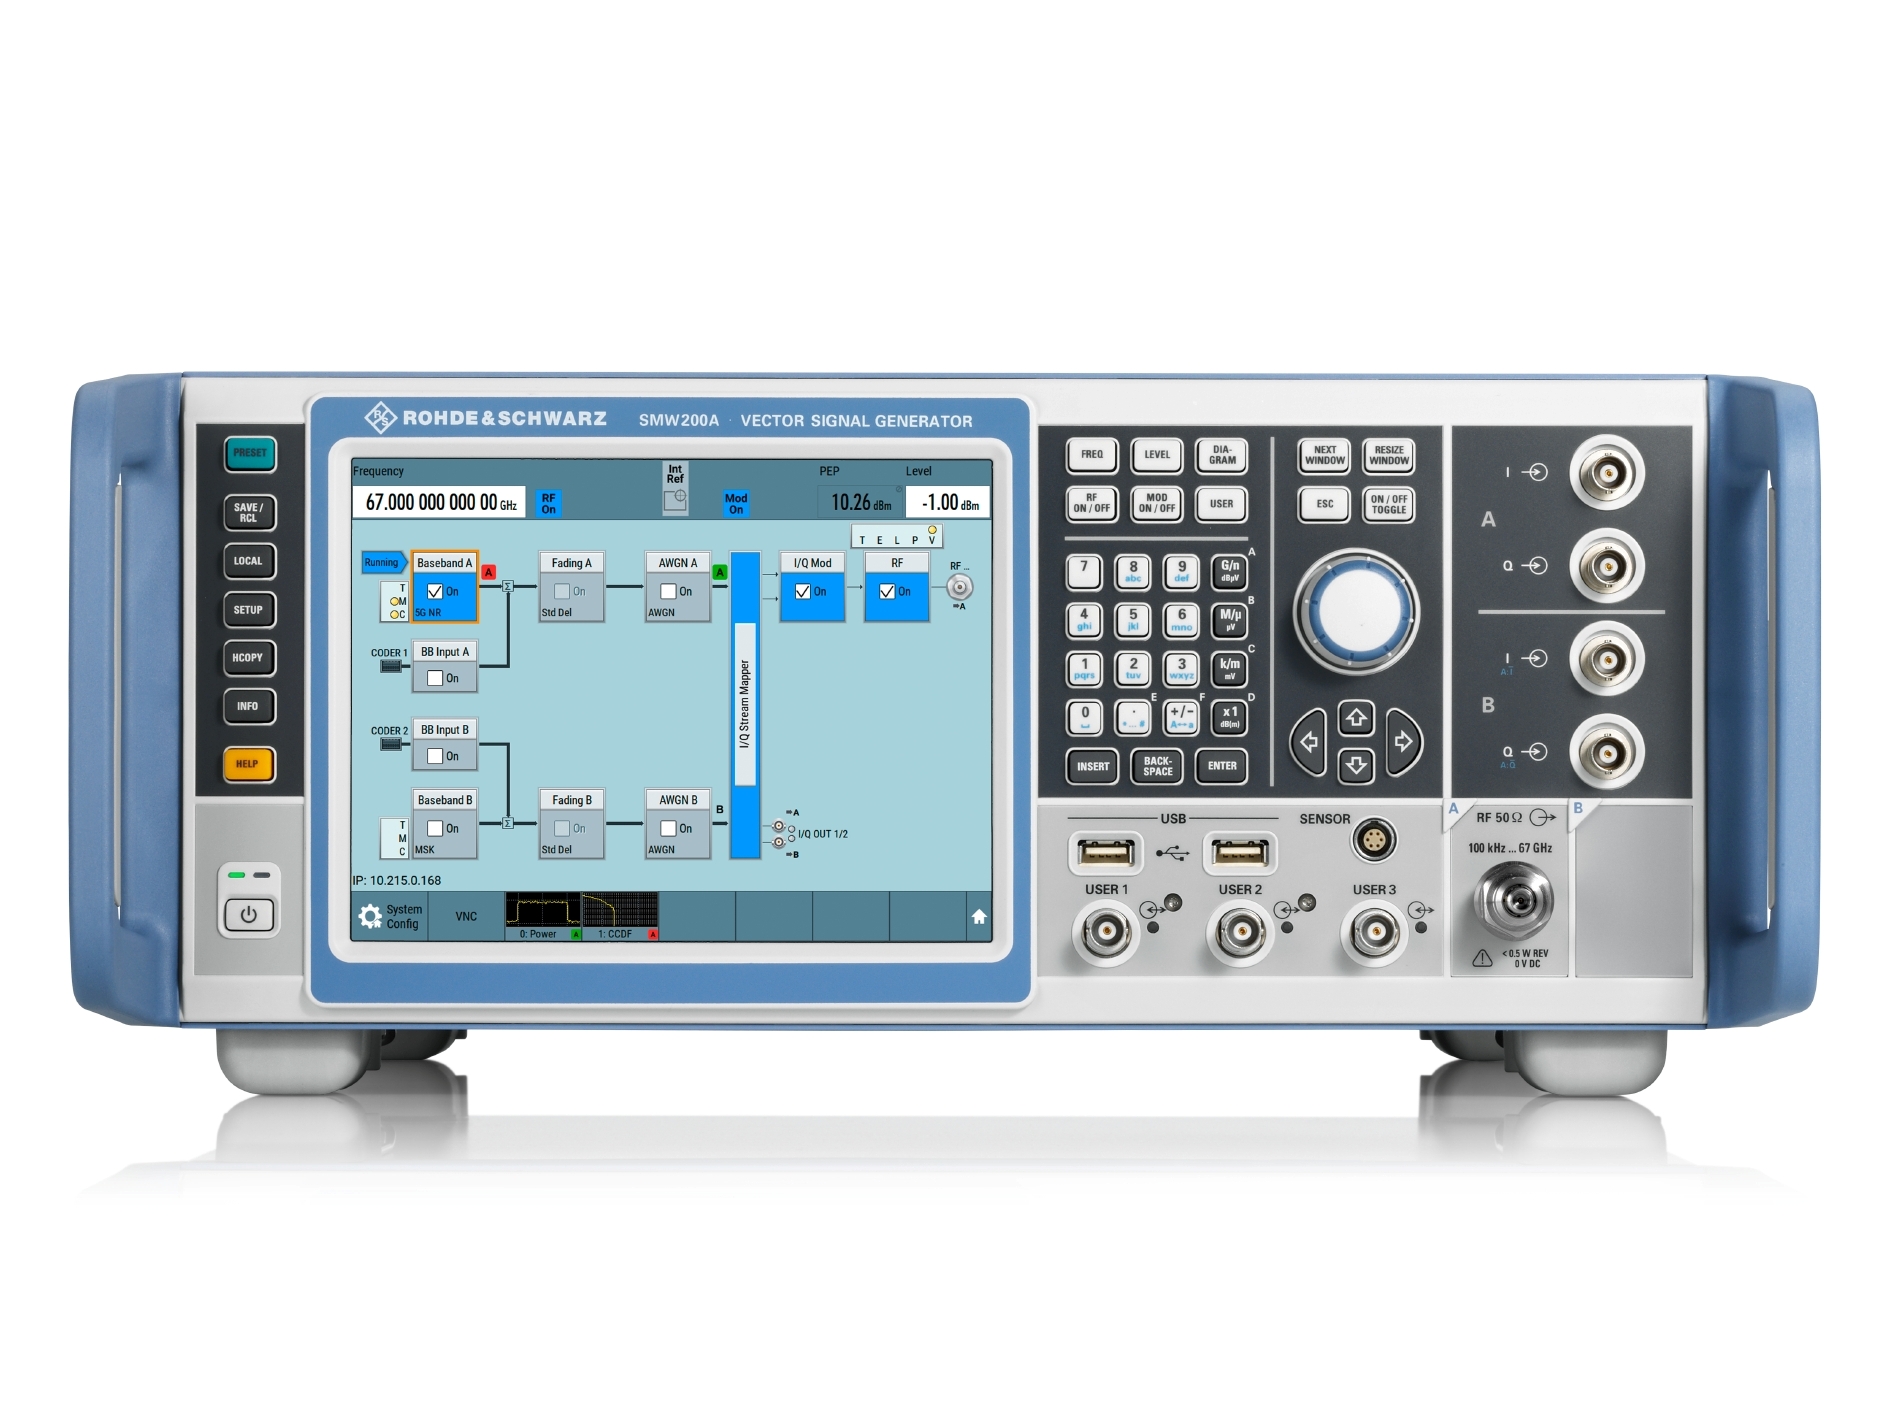 The R&S SMW200A vector signal generator now covers up to 67 GHz as a single-path instrument